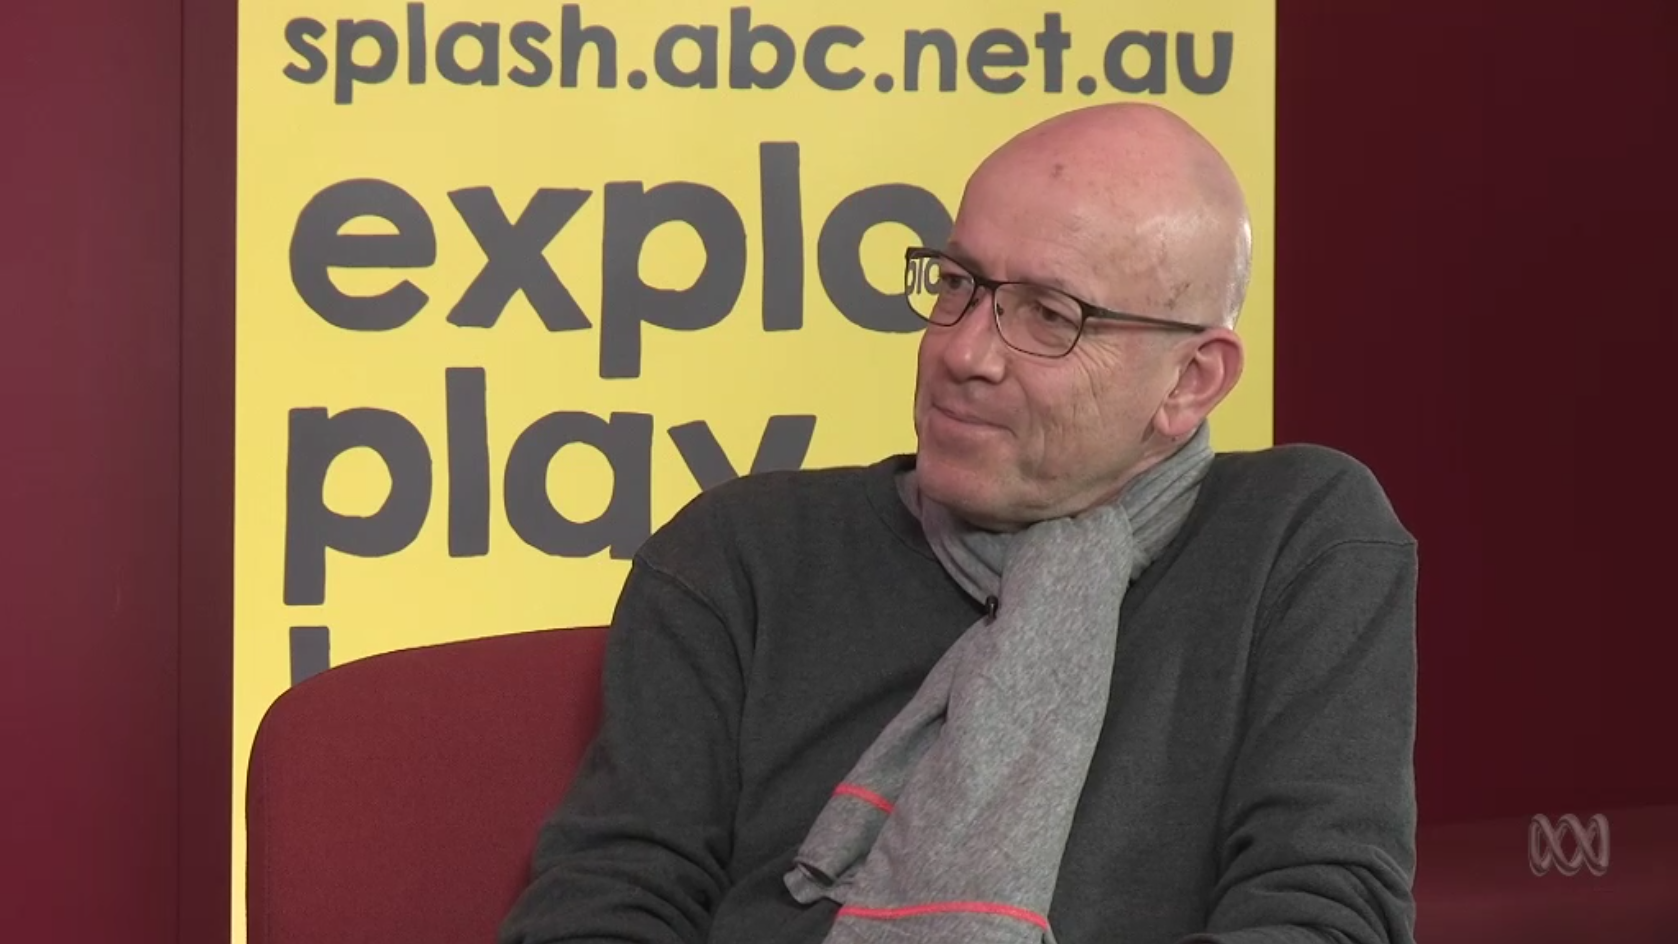 Melbourne Livestream delivered a series of Meet the Author events for ABC Splash from the State Library of Victoria, this episode was with Morris Glietzman